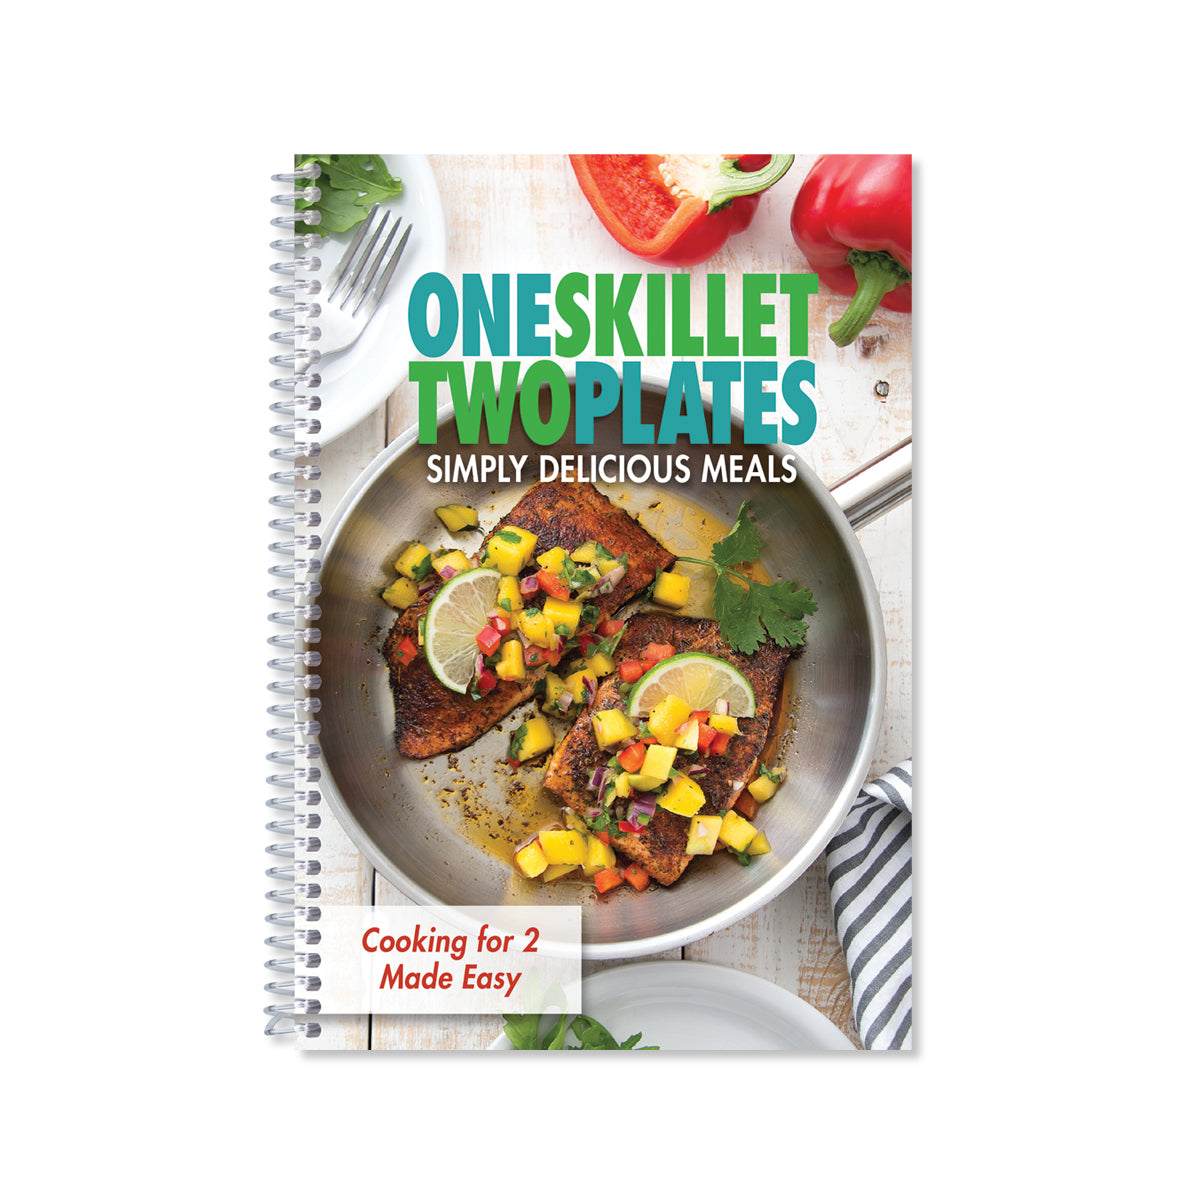 One Skillet, Two Plates Book cover. Cooking for two made easy.